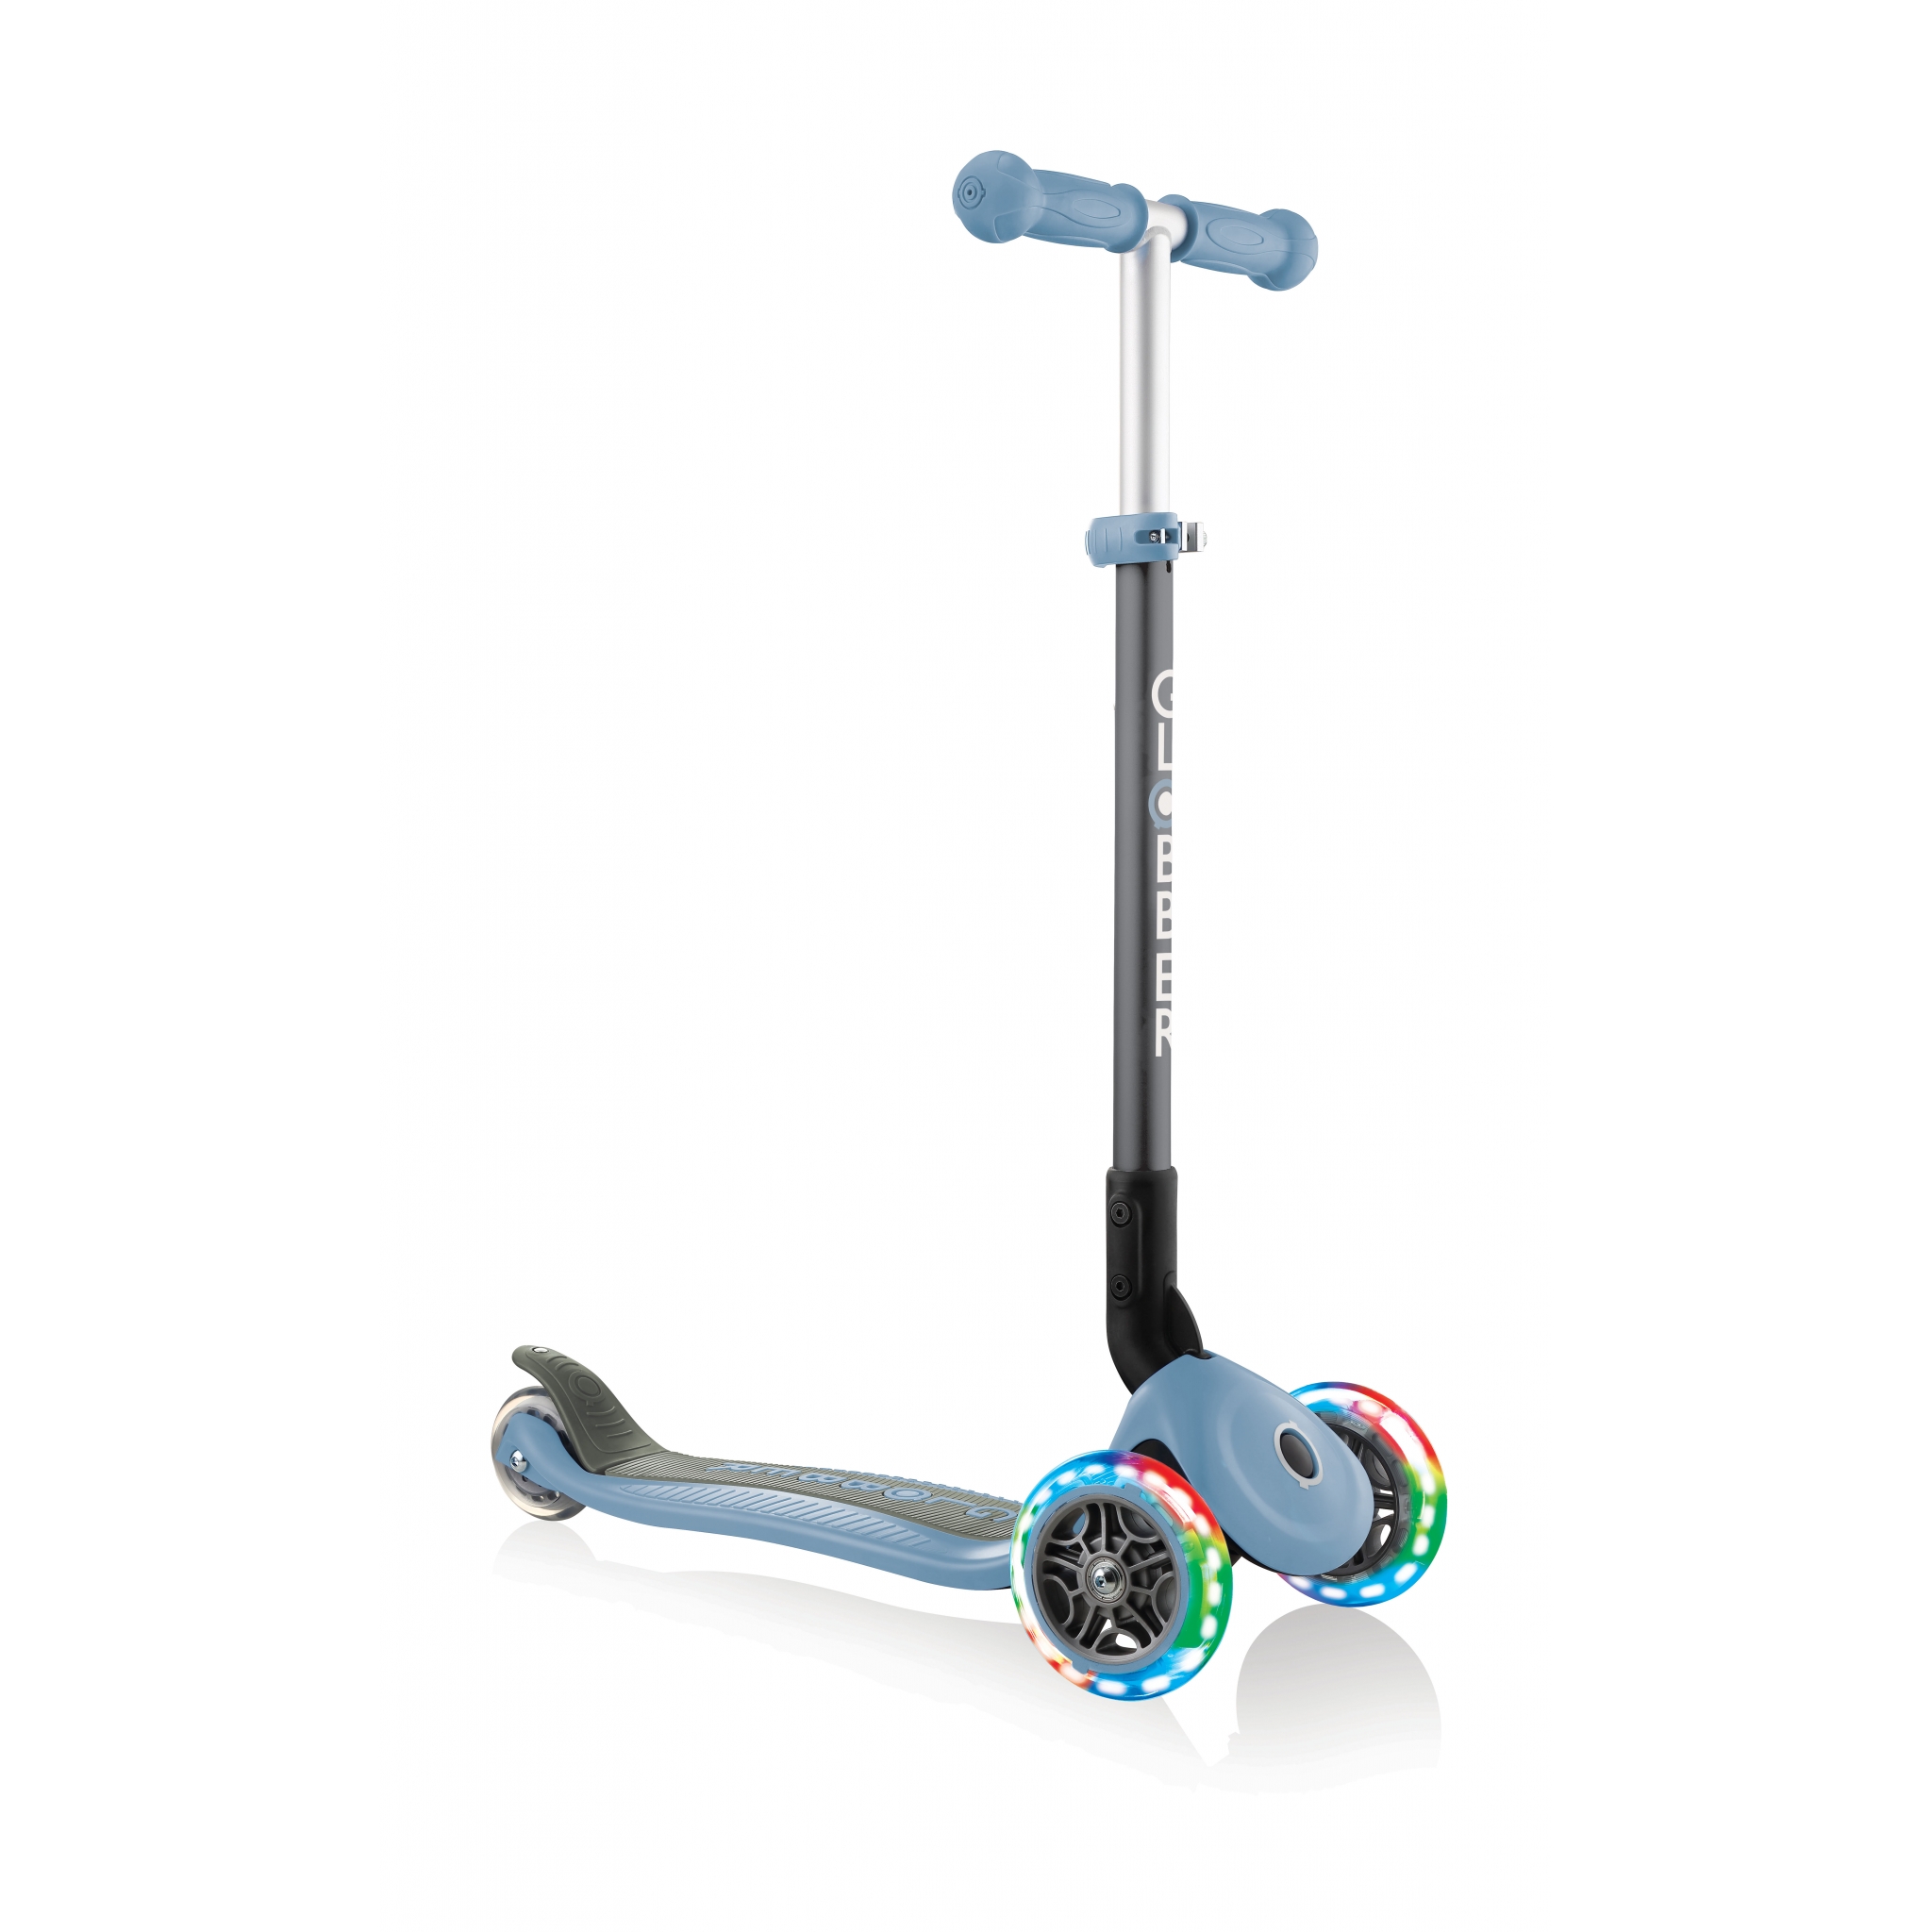 PRIMO-FOLDABLE-LIGHTS-3-wheel-foldable-scooter-light-up-scooter-for-kids-ash-blue 4